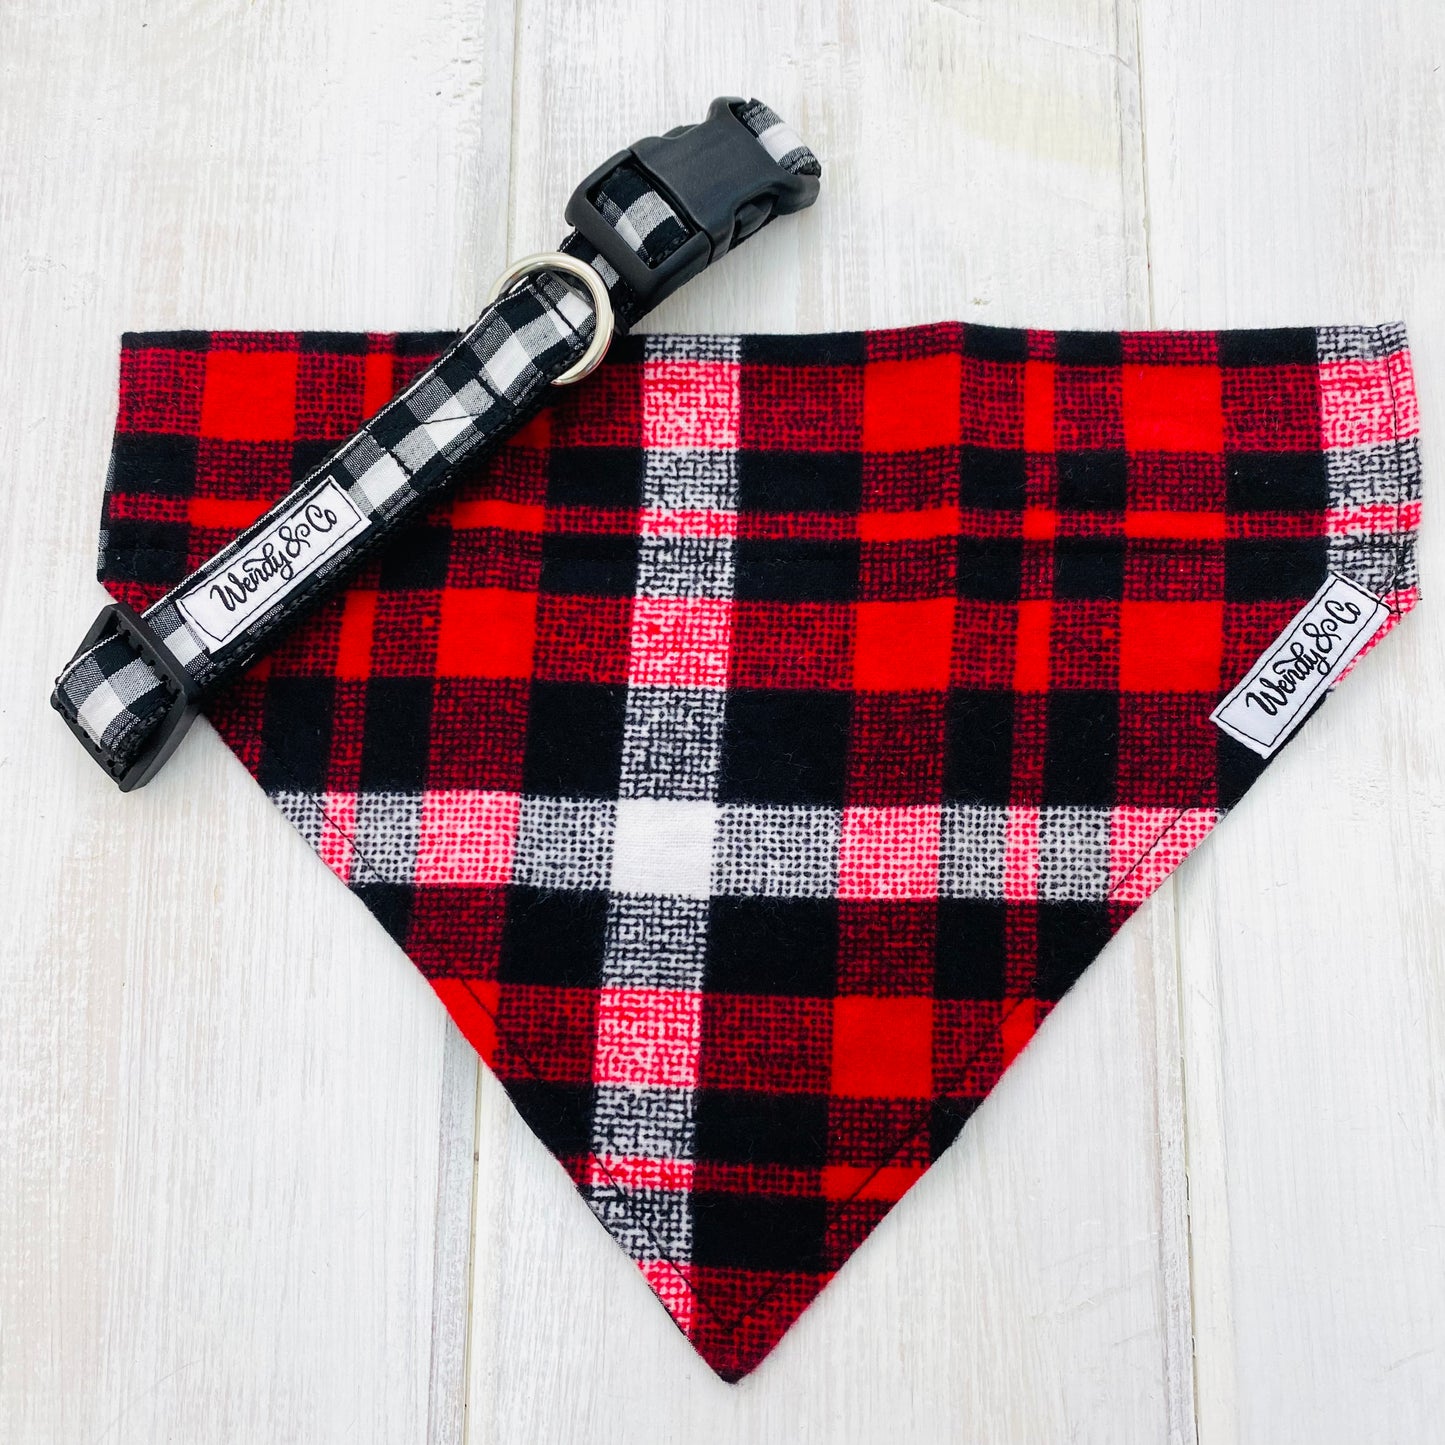 Cute dog bandana in cozy red, black and white plaid.